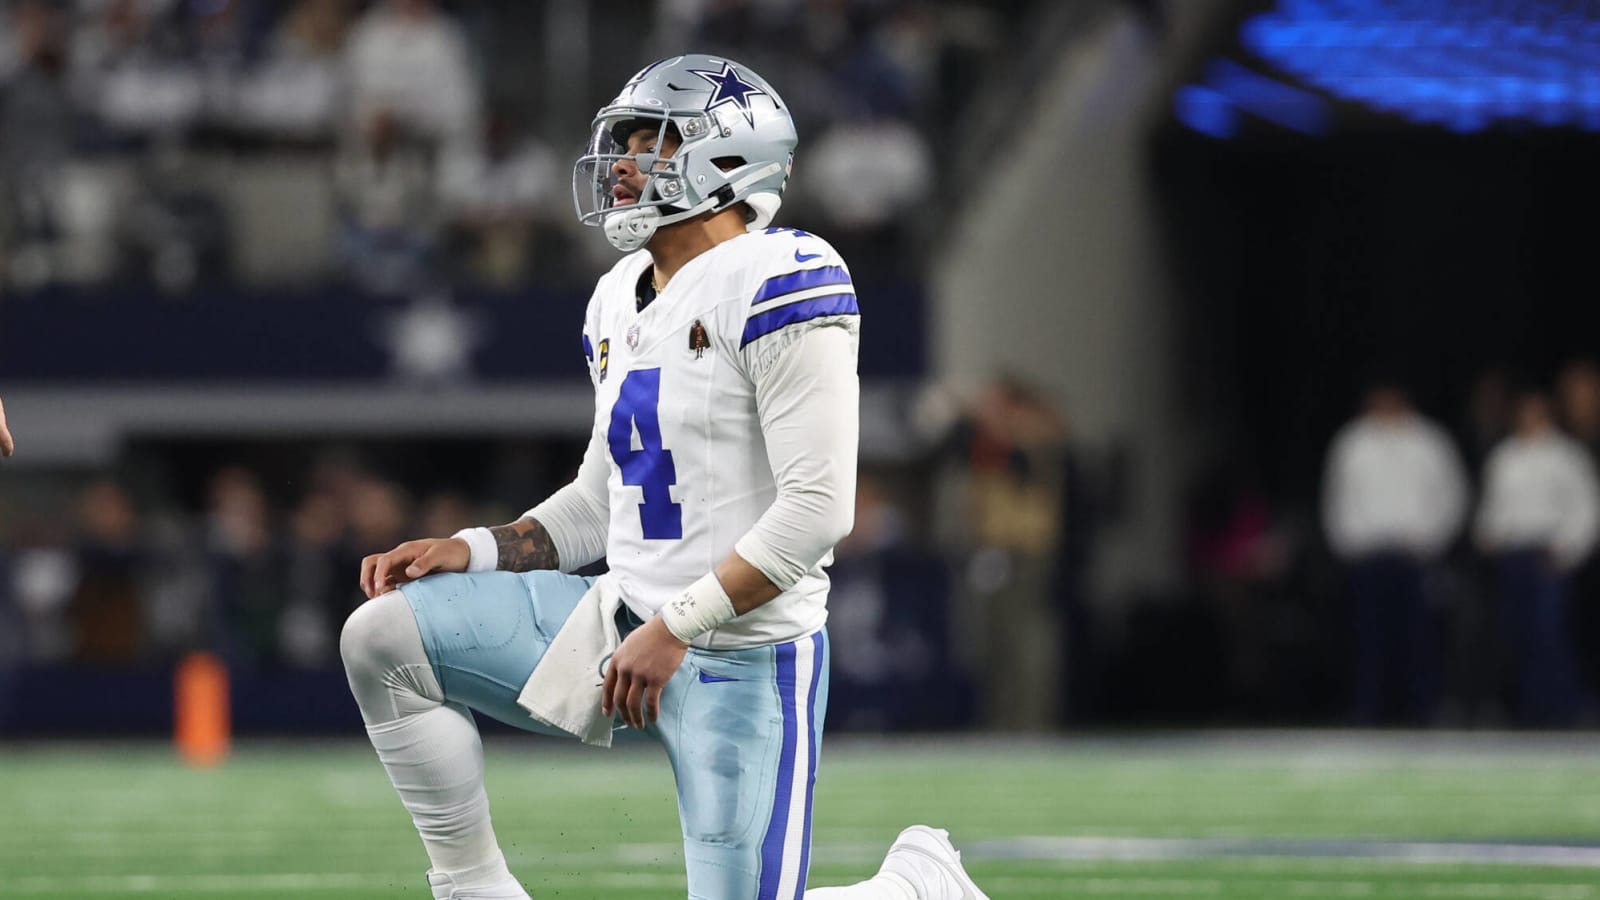 Steelers legend Terry Bradshaw calls out Dak Prescott for lacking the killer instinct within him, urges him to 'have some nastiness' to his personality